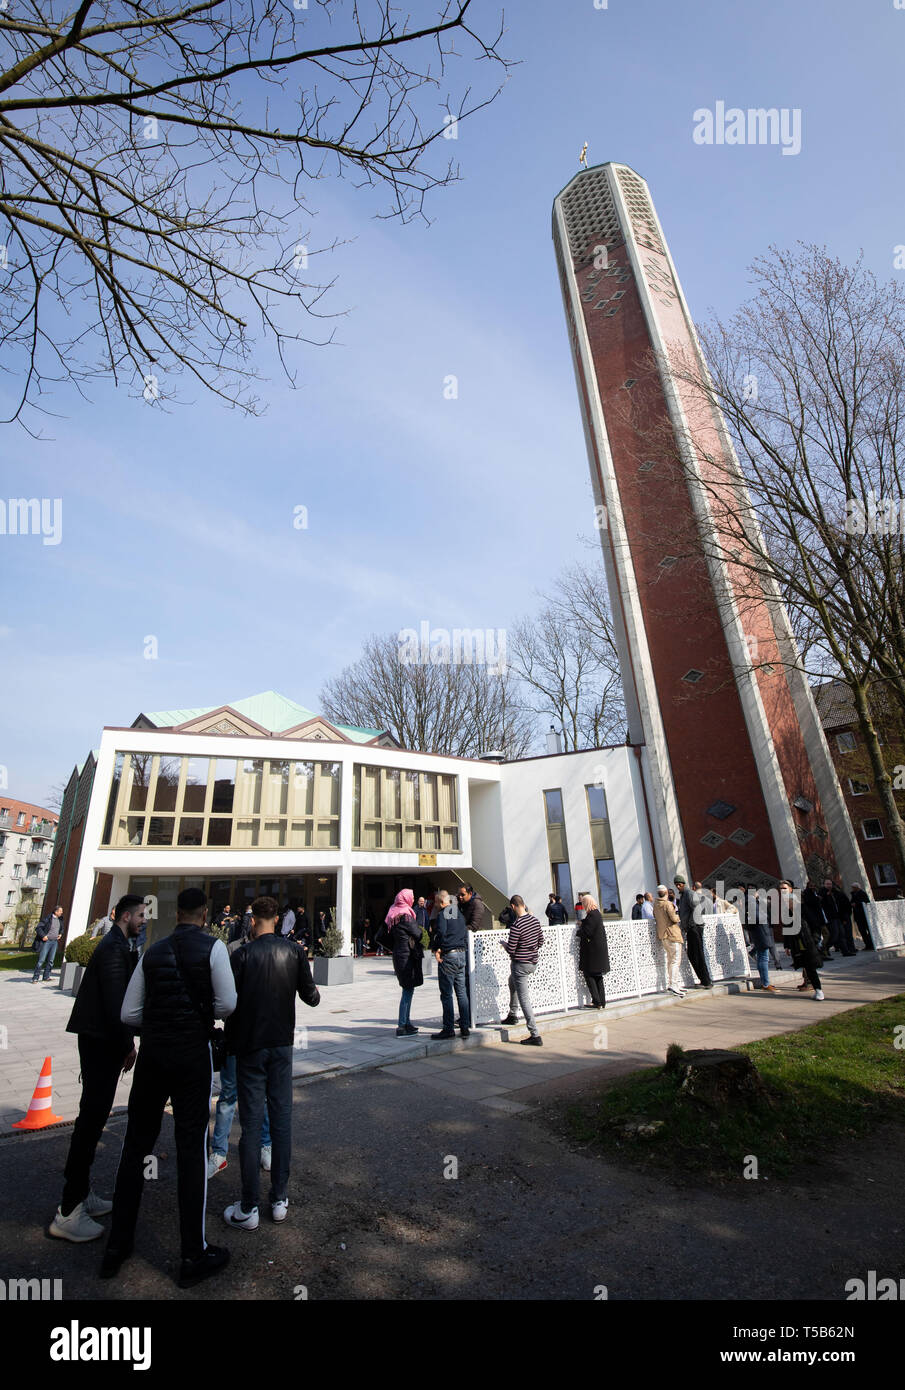 Hamburg, Germany. 29th Mar, 2019. Exterior view of the Al-Nour-Mosque in the district Hamburg Horn after the Friday prayers. The mosque was rebuilt from the former Protestant Capernaum church and was opened in September 2018. Credit: Christian Charisius/dpa/Alamy Live News Stock Photo